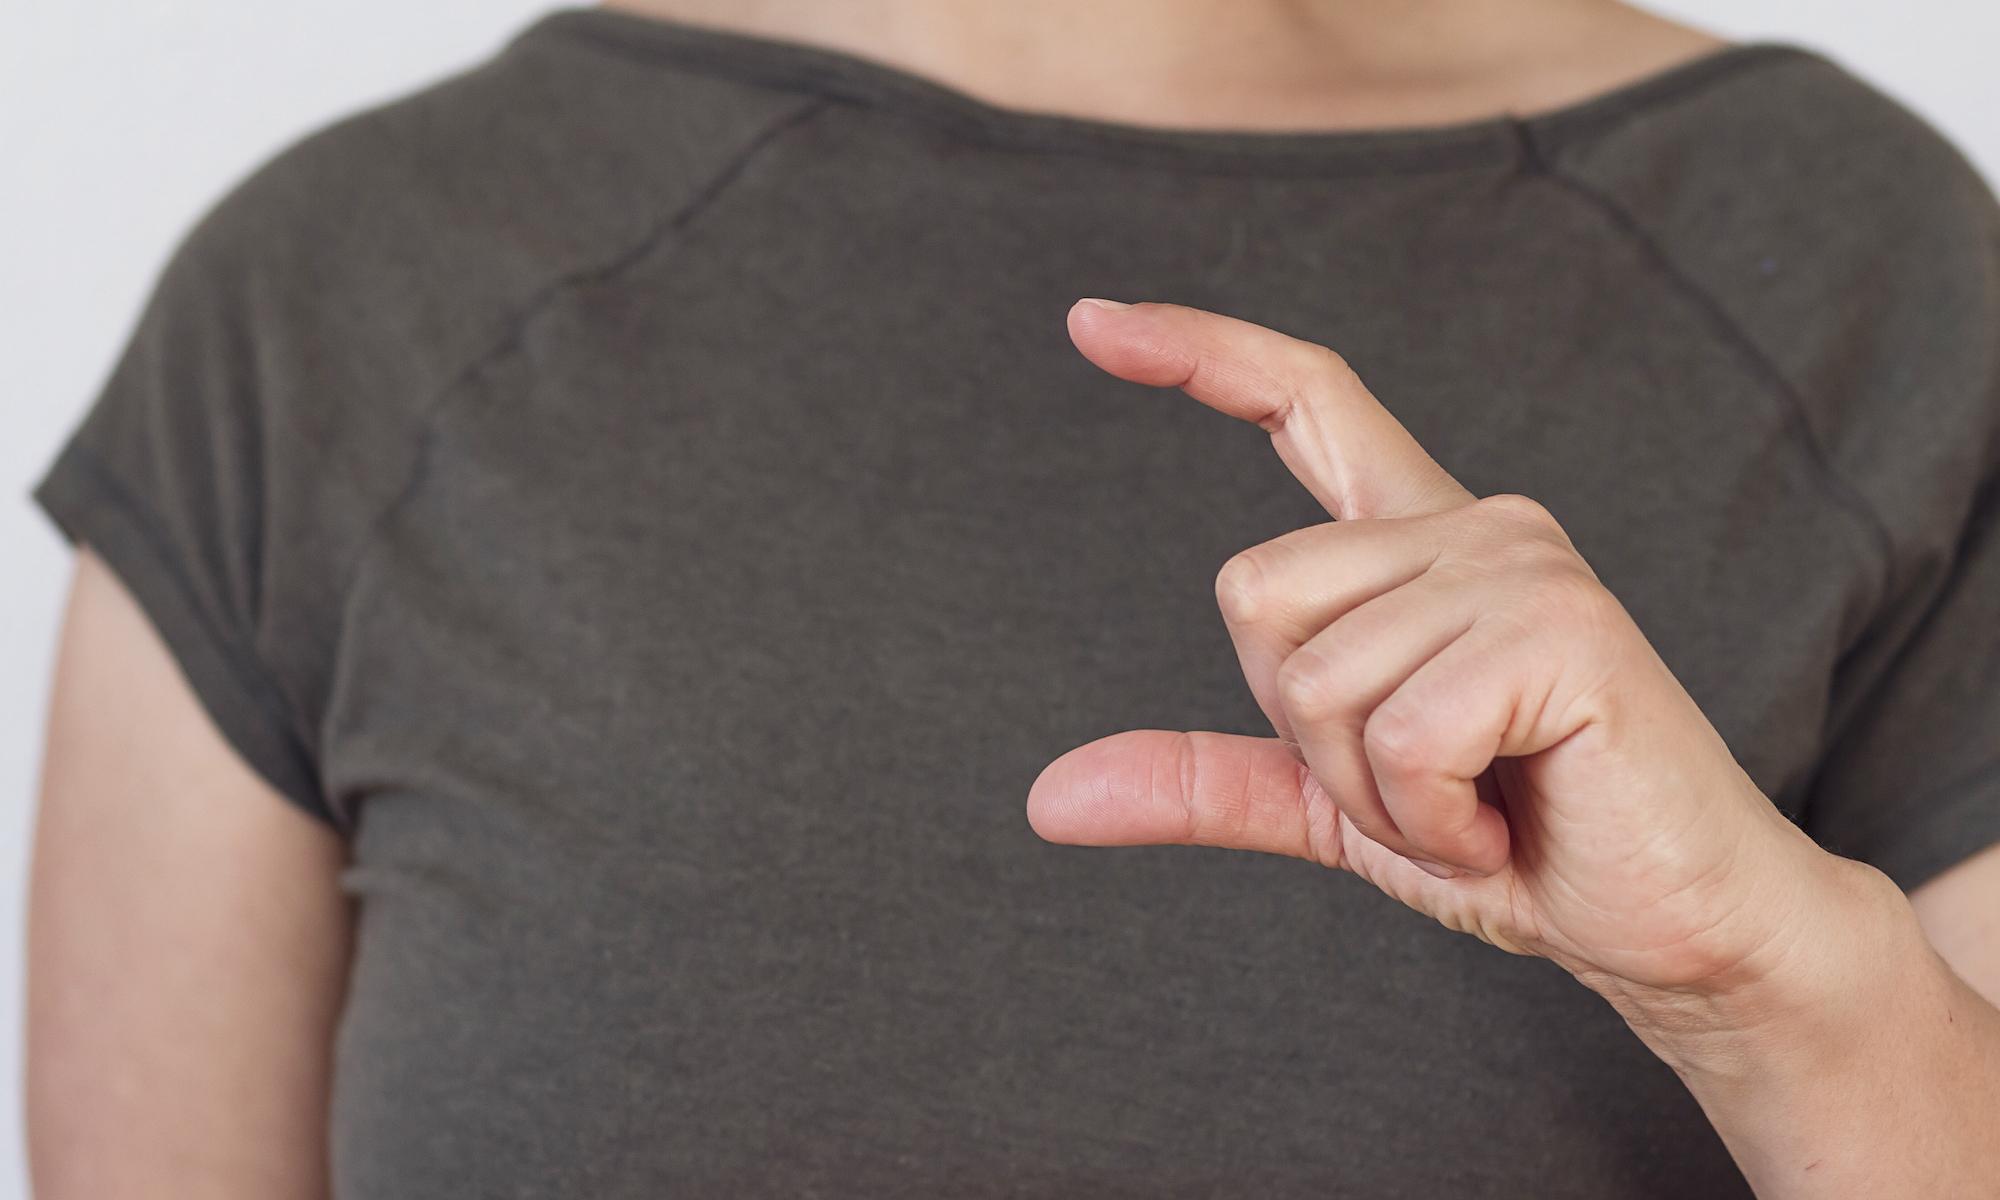 Woman's hand making gesture used in test for Parkinson's disease.